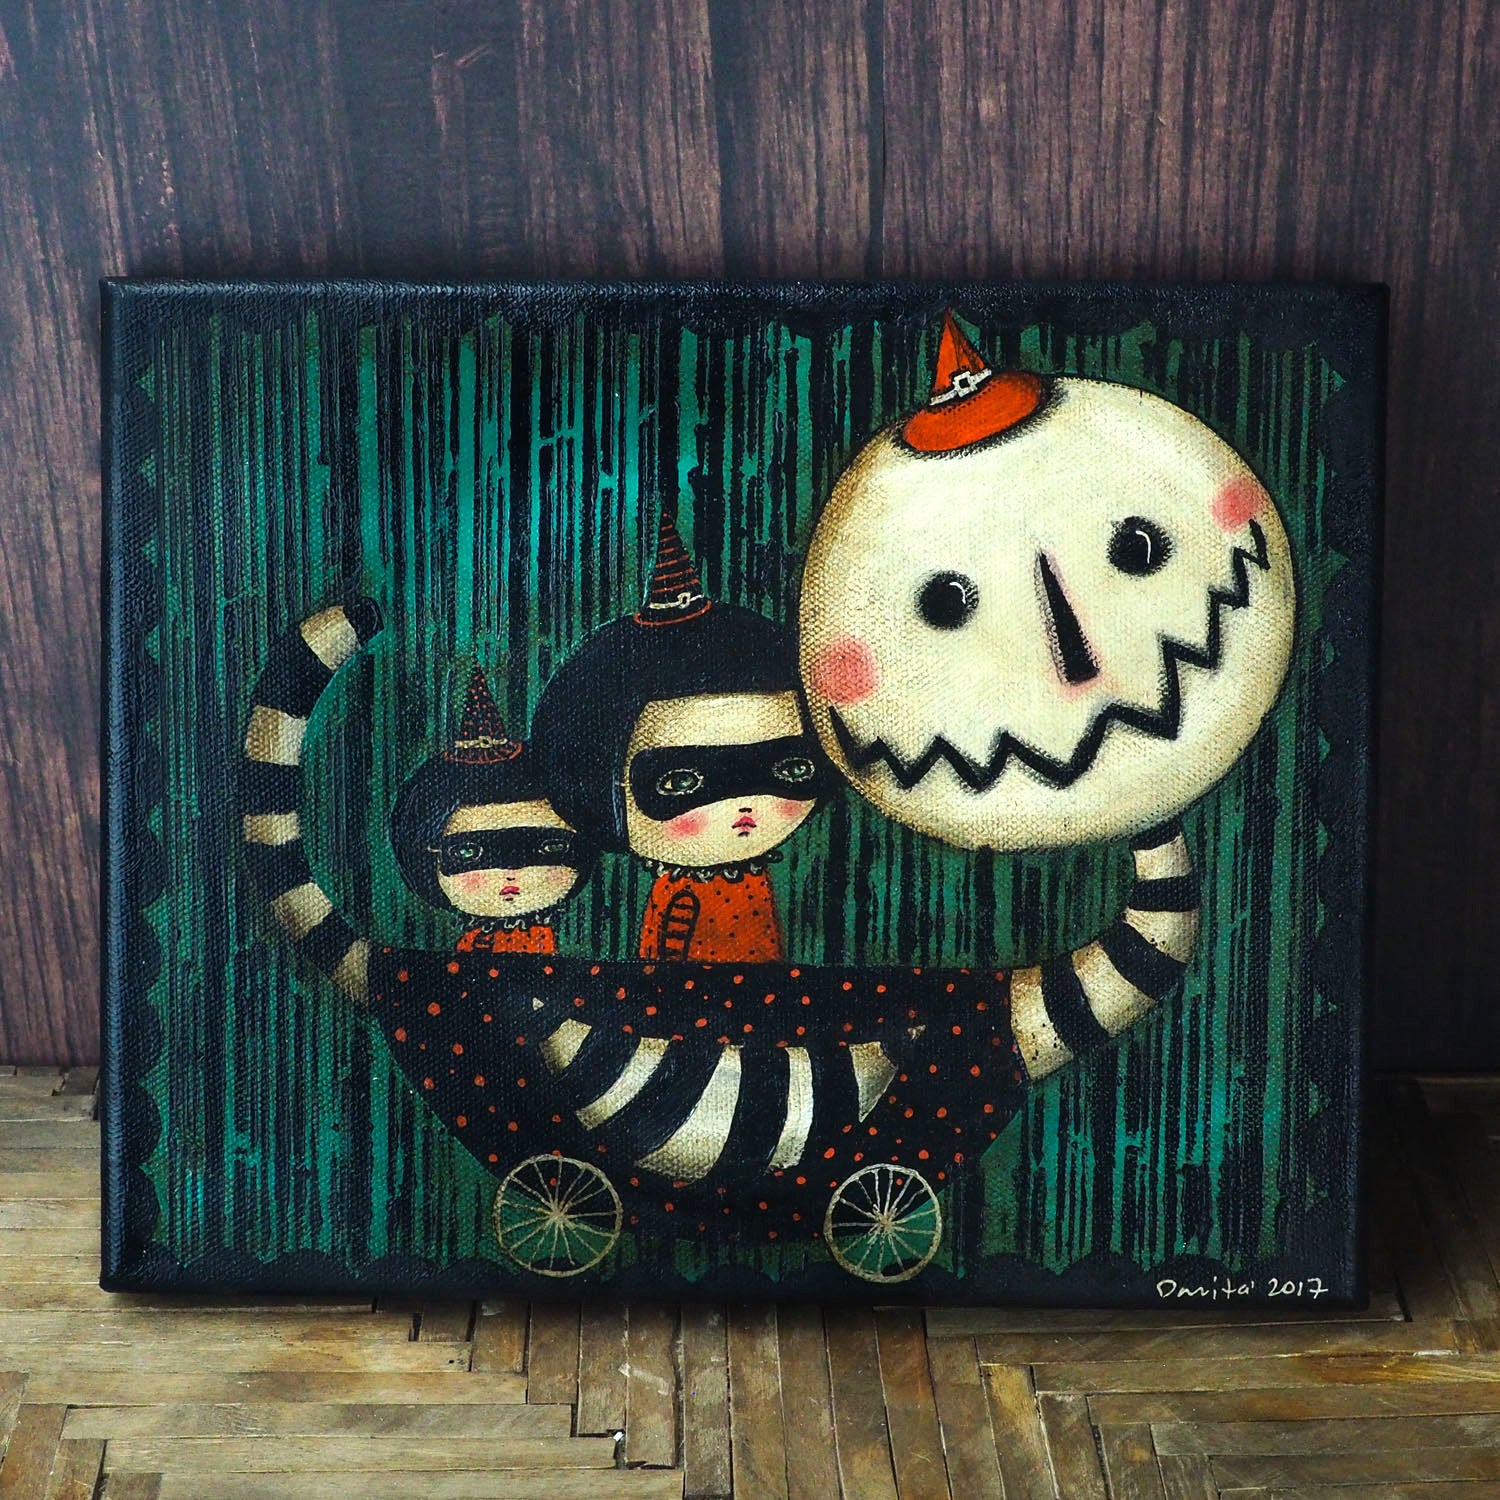 Halloween is celebrated by Danita in the best way, with an amazing collection of mixed media witches, pumpkins and strange characters the lurk in darkness on Halloween.